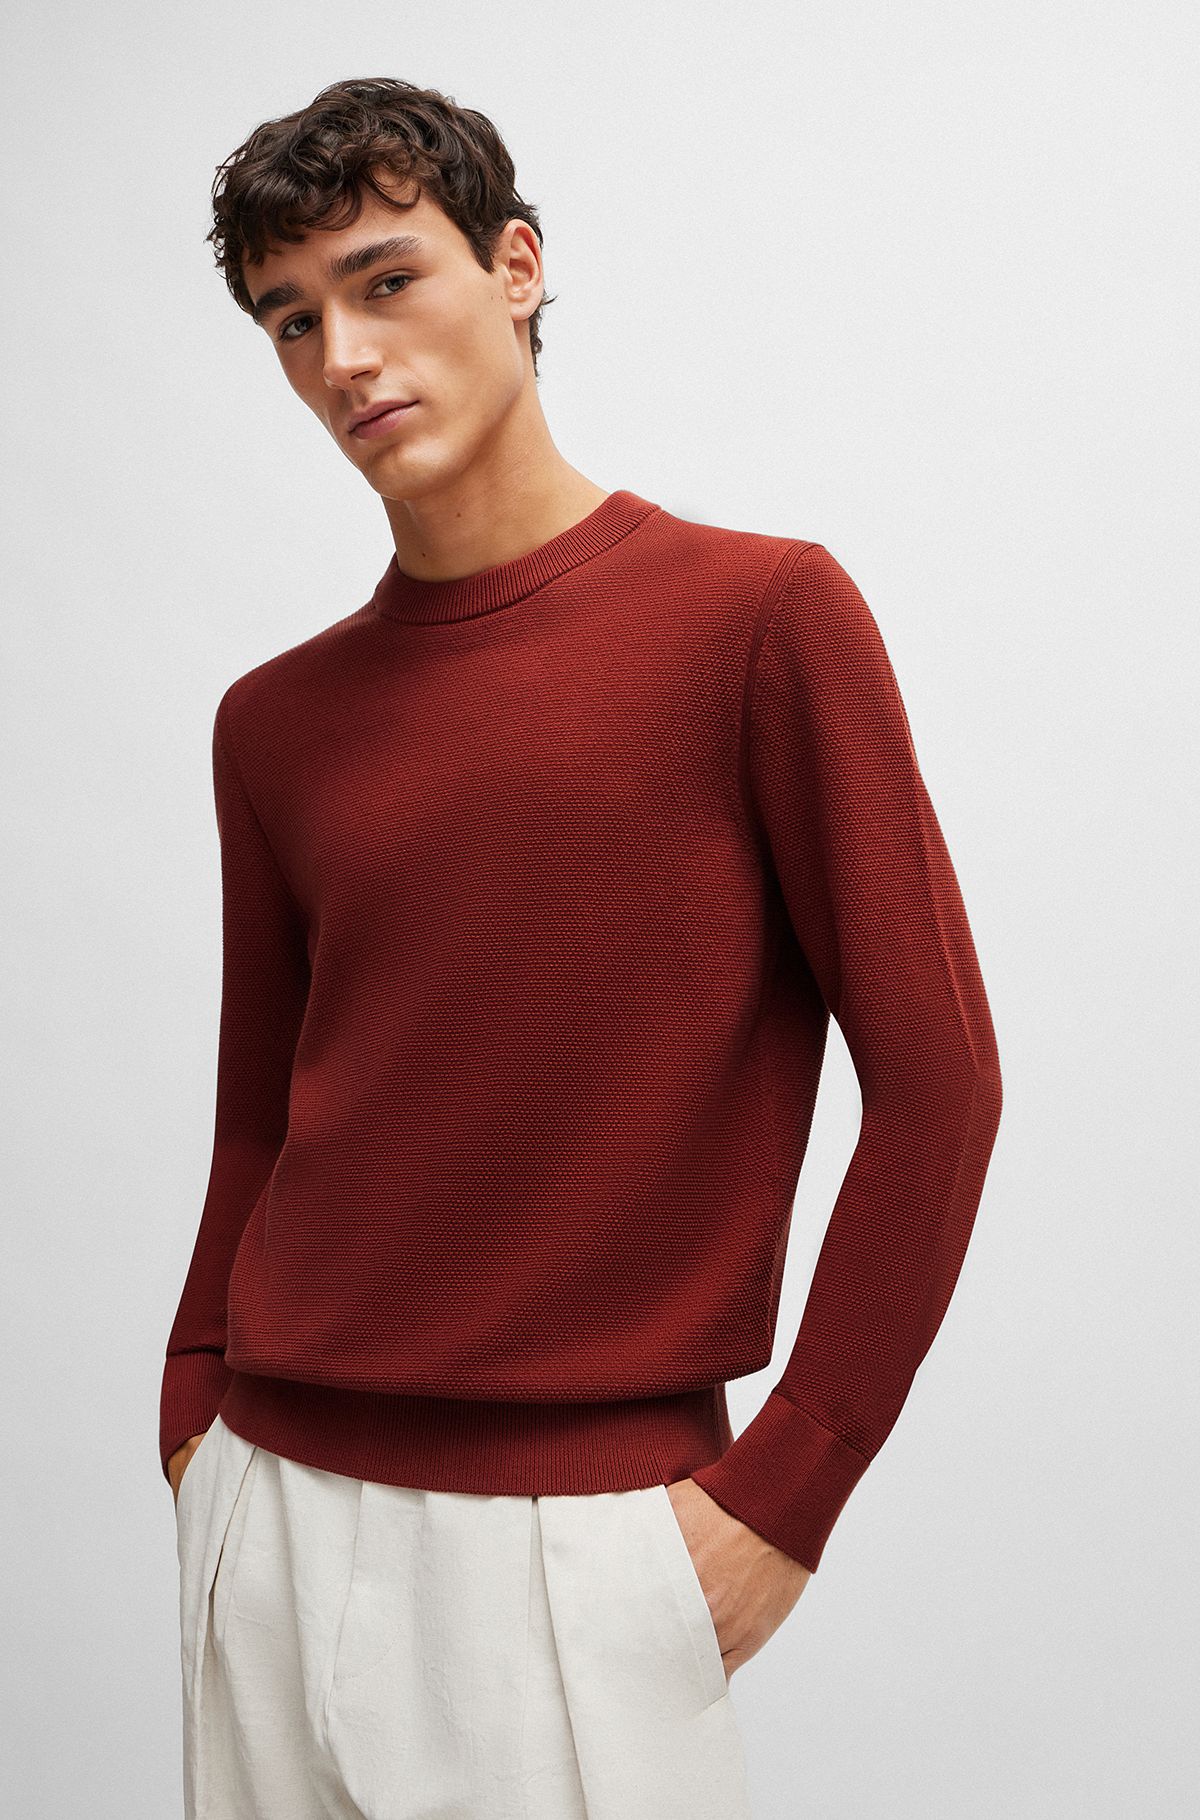 Micro-structured crew-neck sweater in cotton, Light Brown